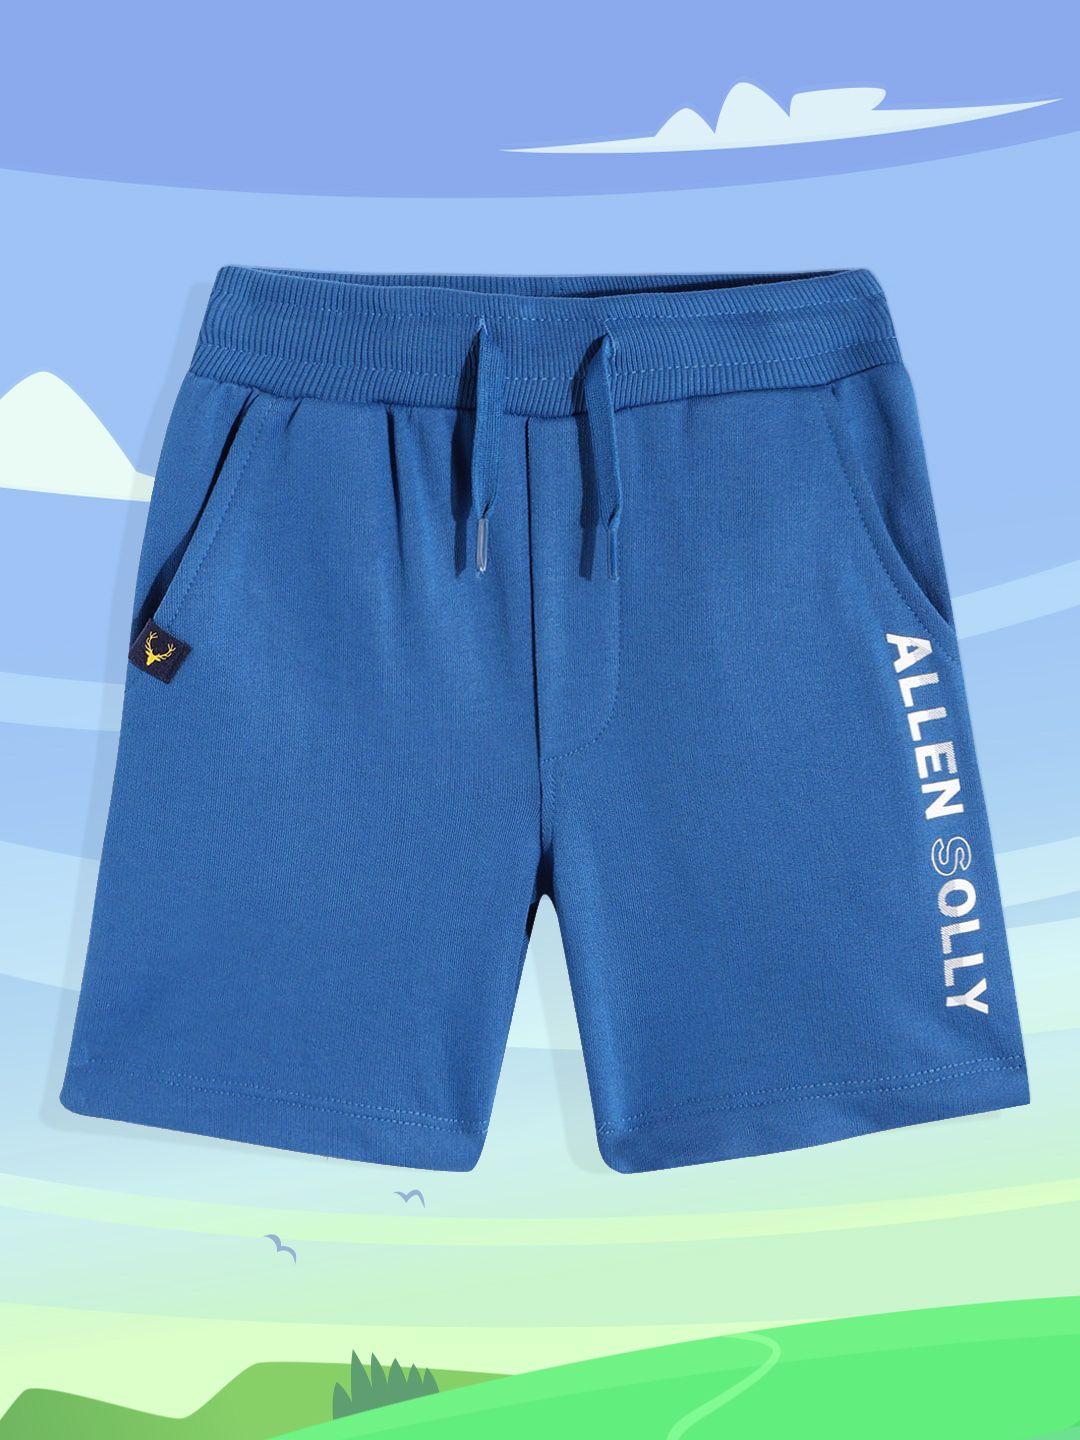 allen solly junior boys blue & white placement brand logo printed shorts